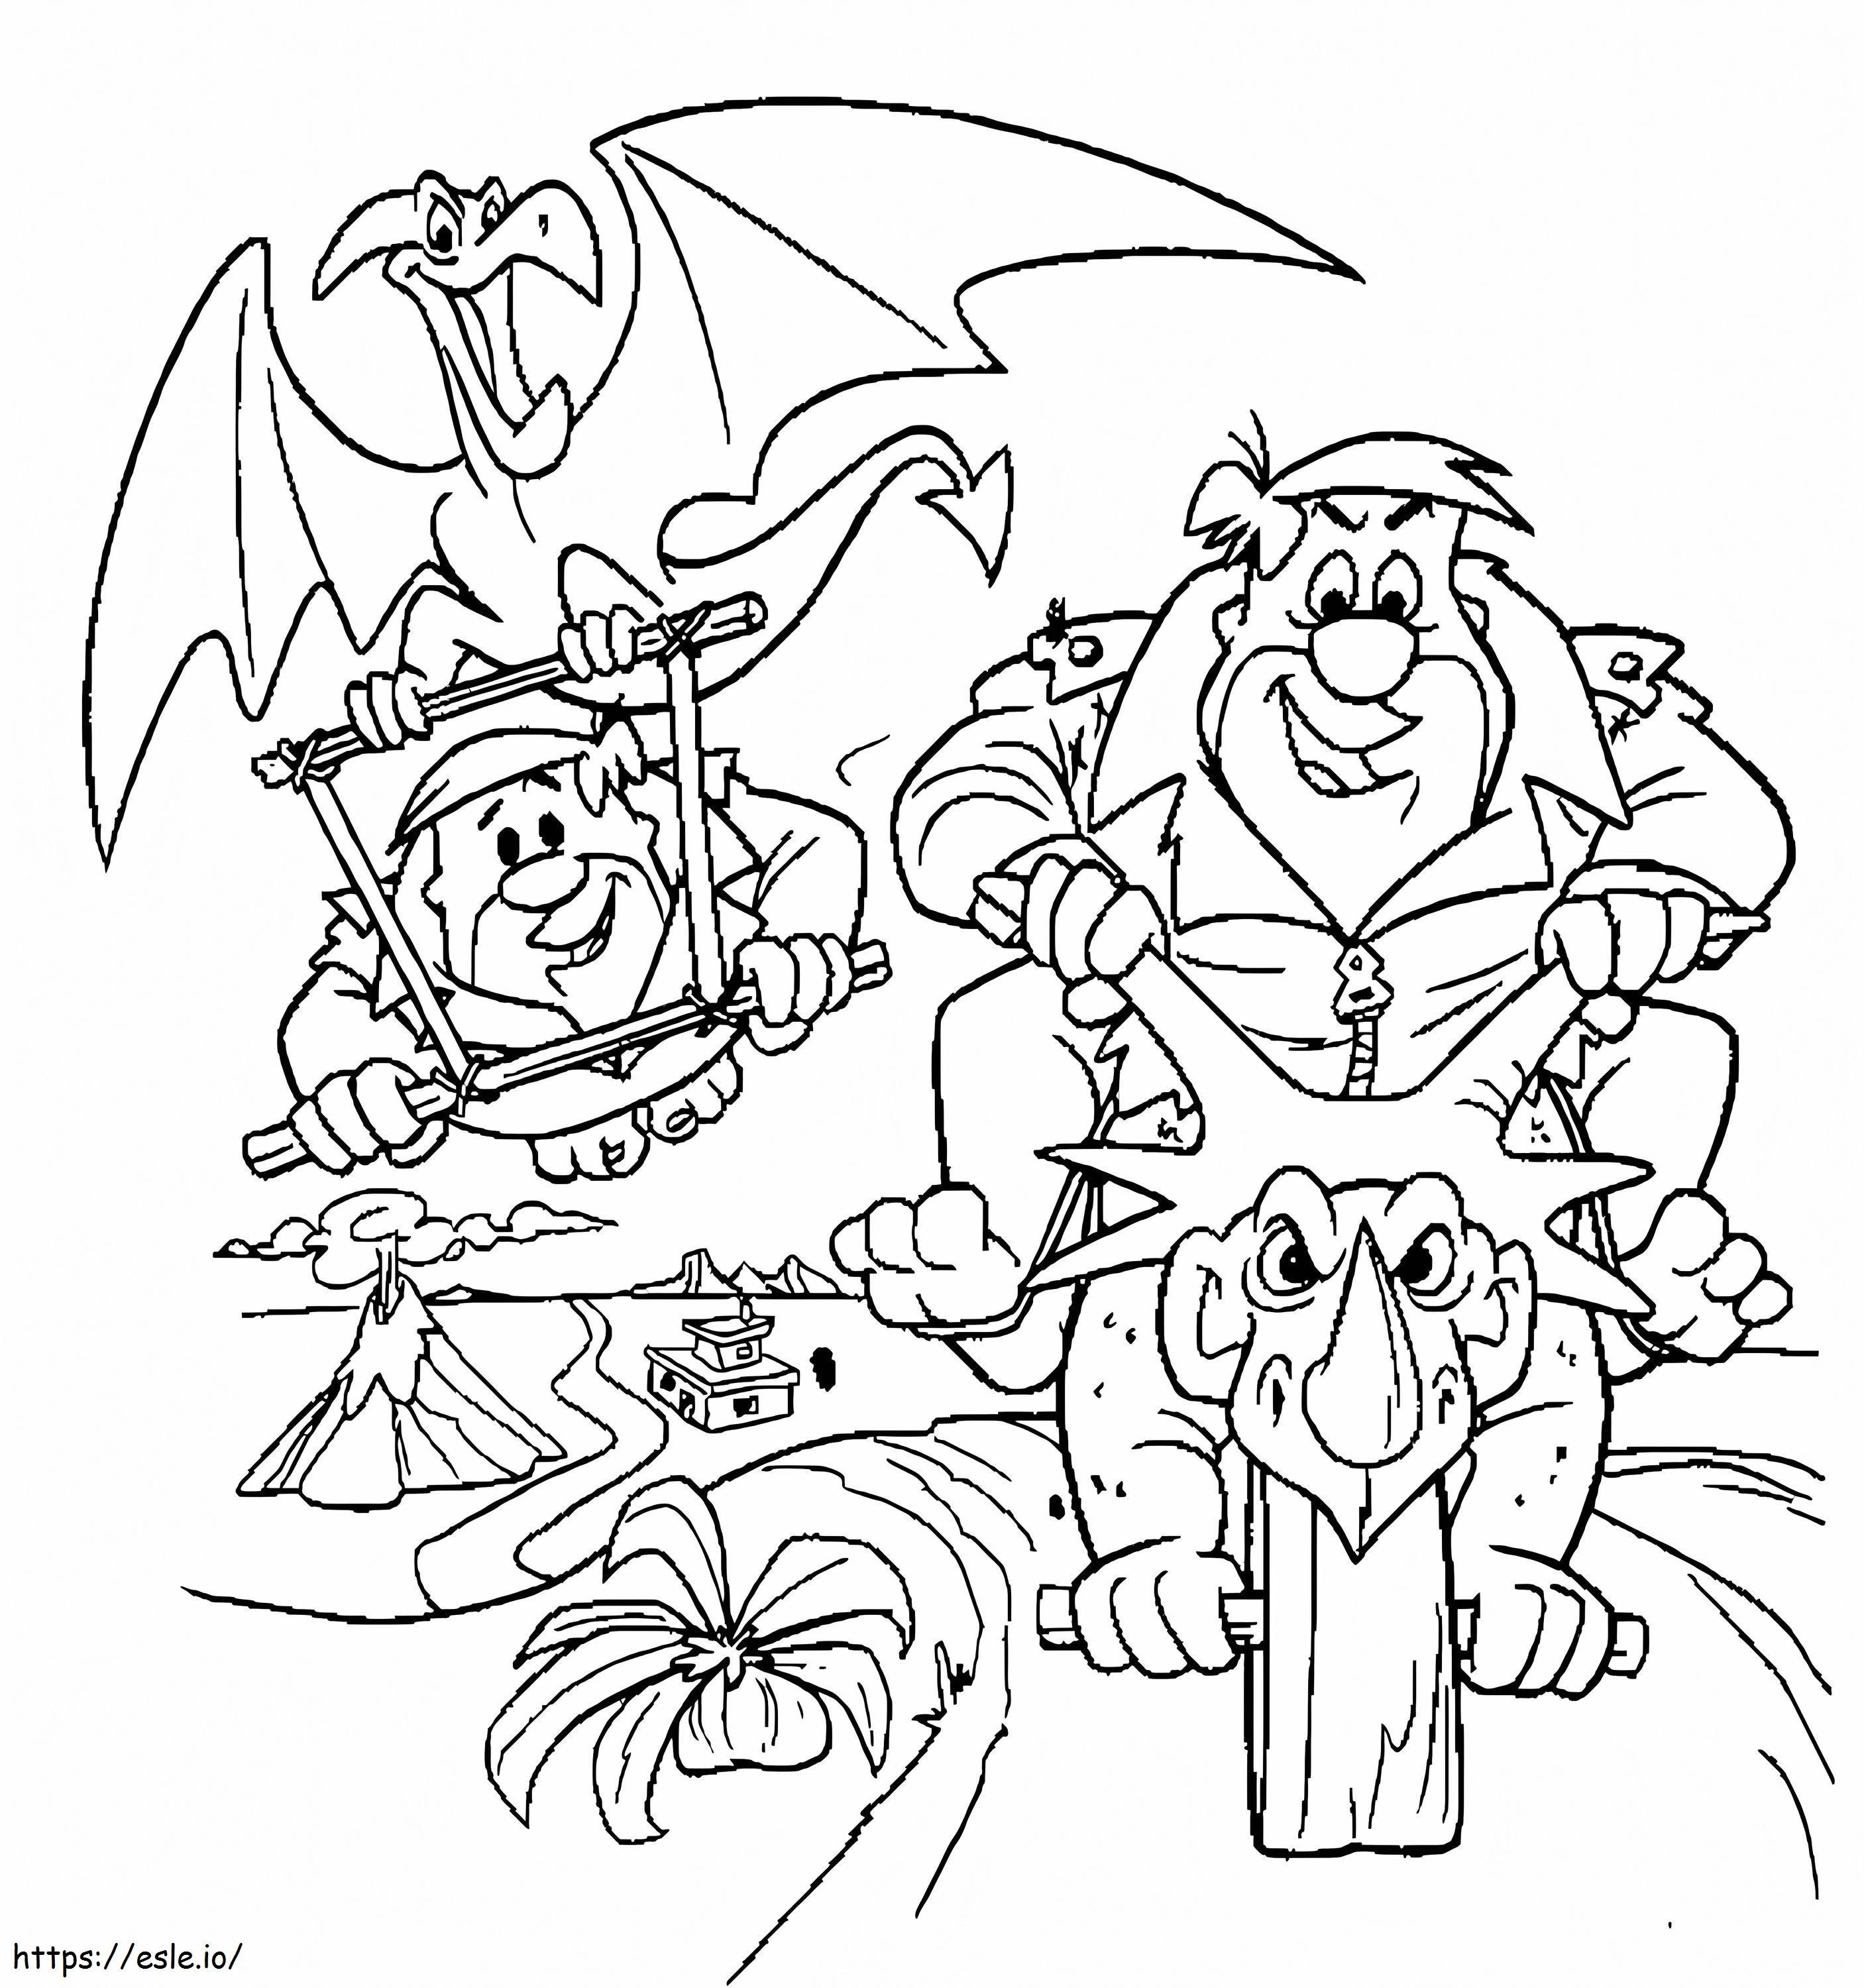 Barney And Fred coloring page